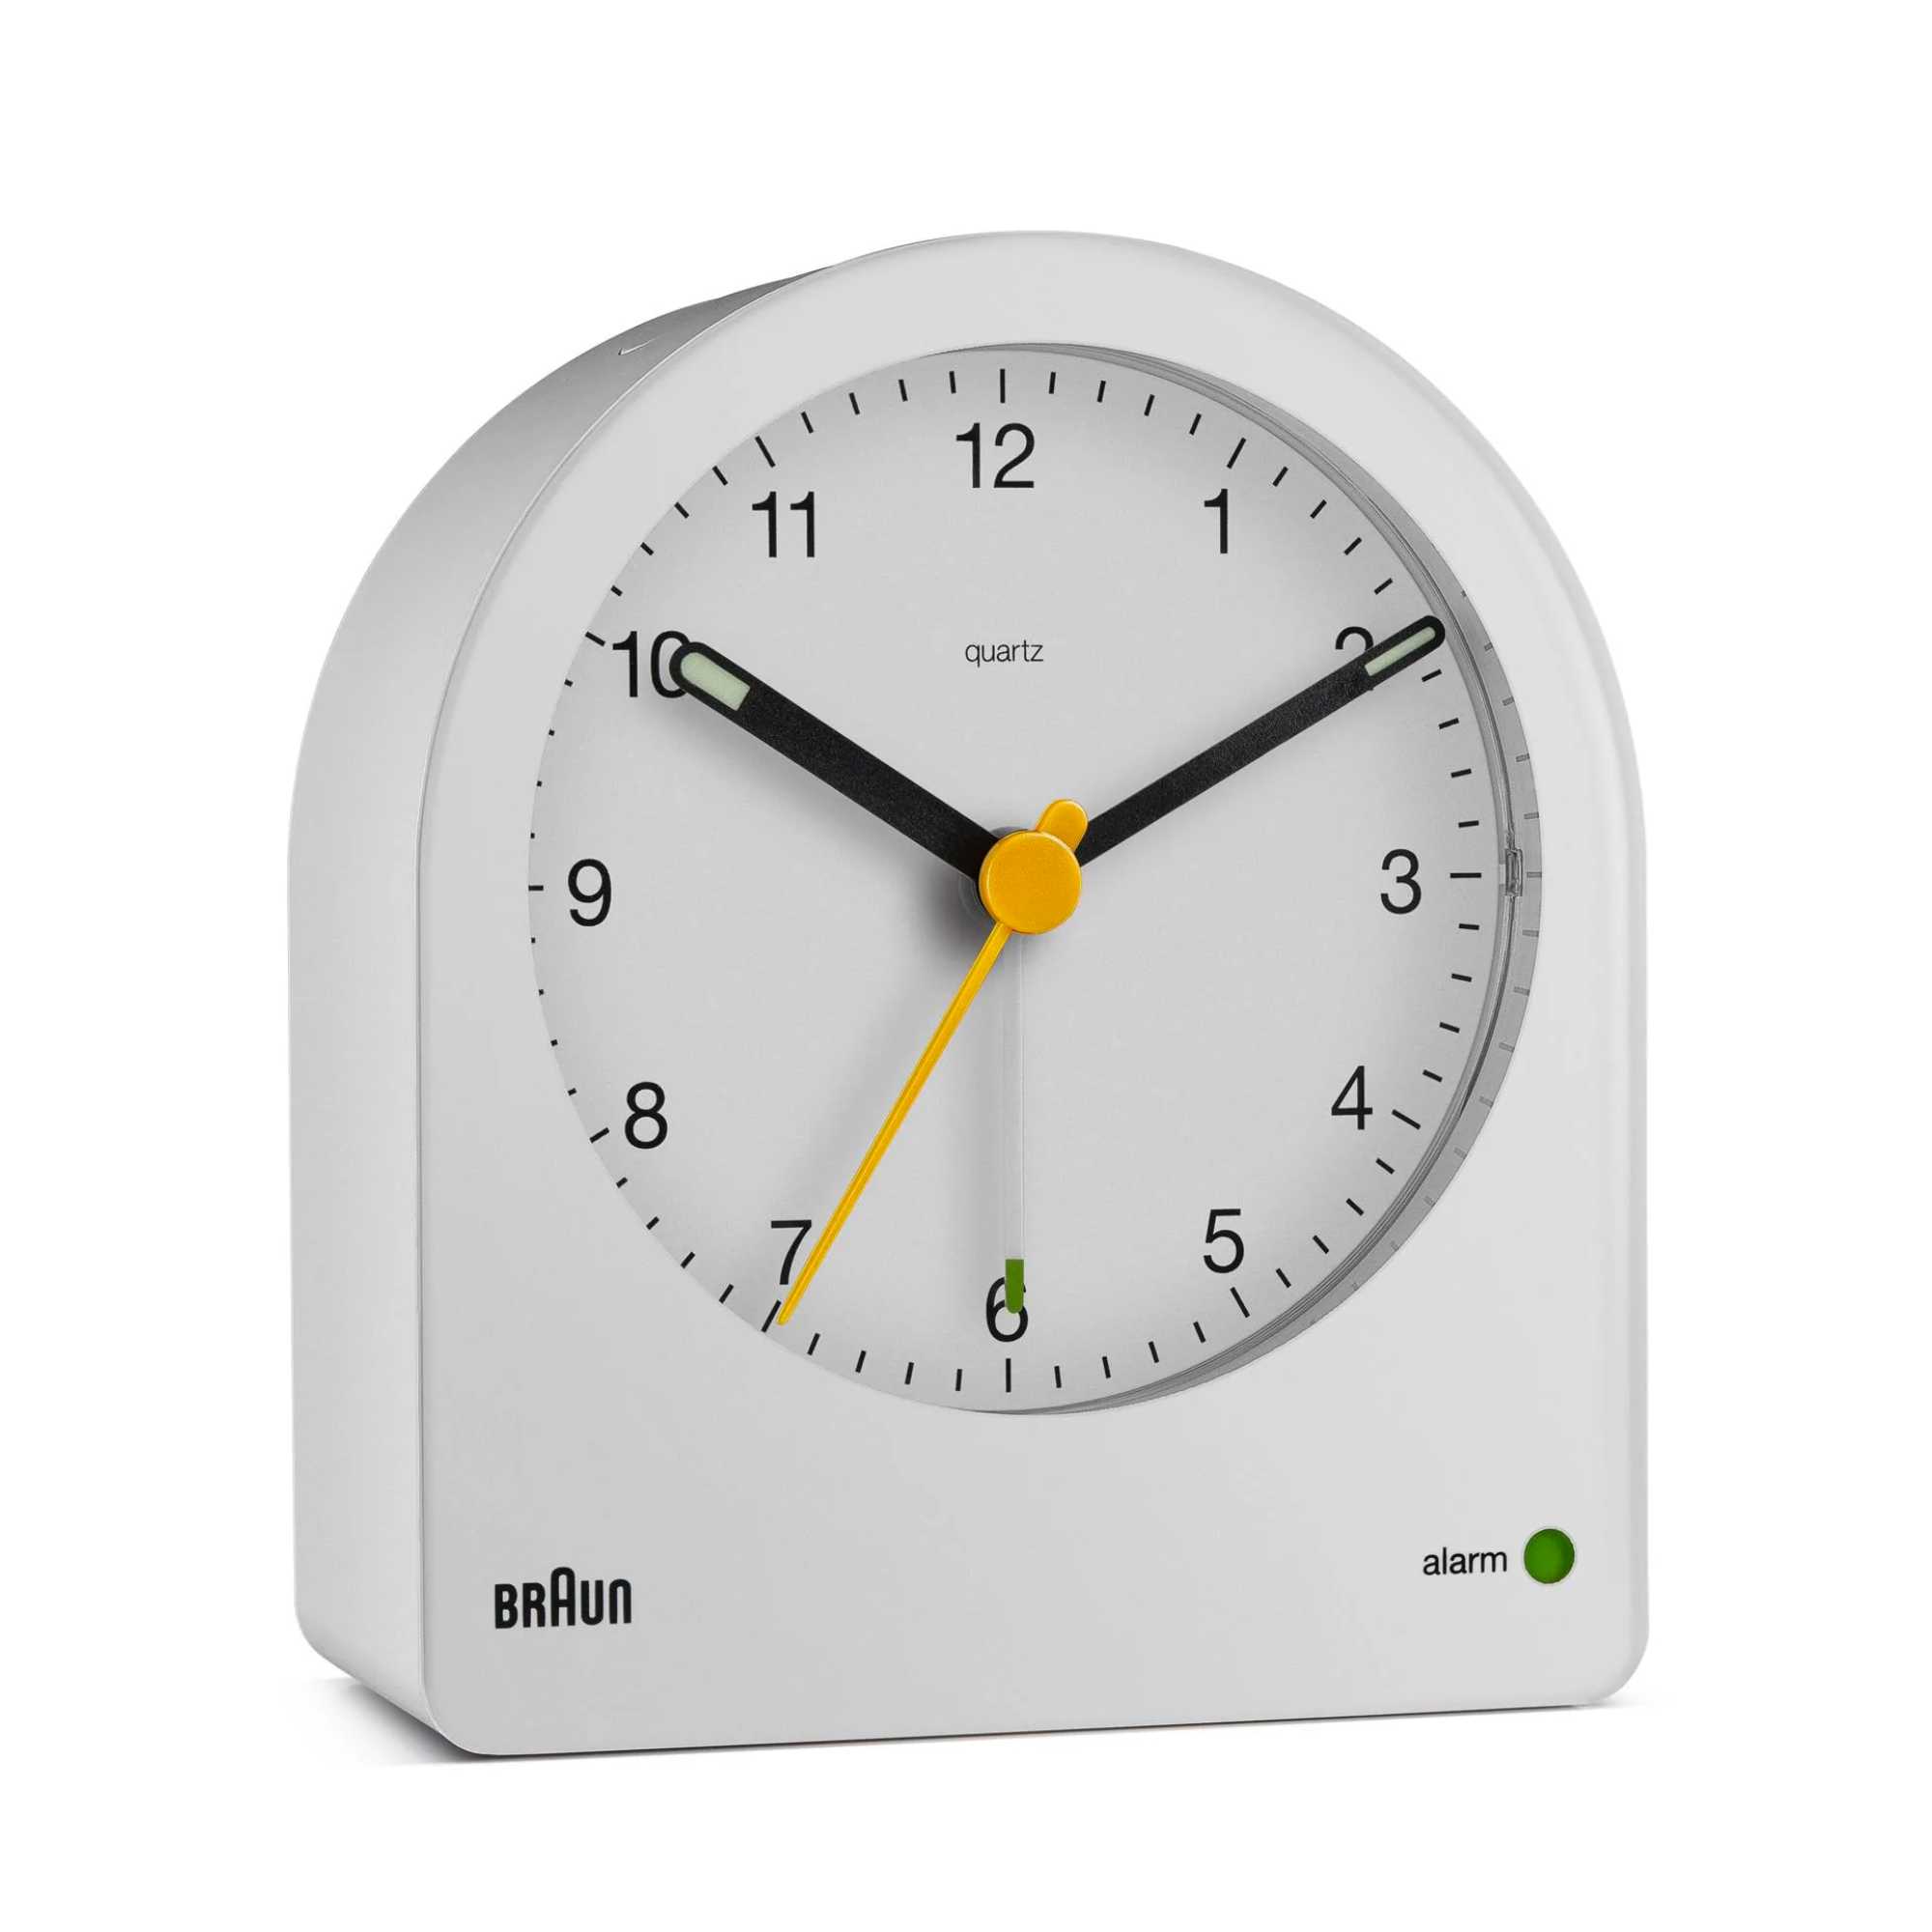 Braun BC22 Analogue Alarm Clock with Snooze and Continuous Backlight, White